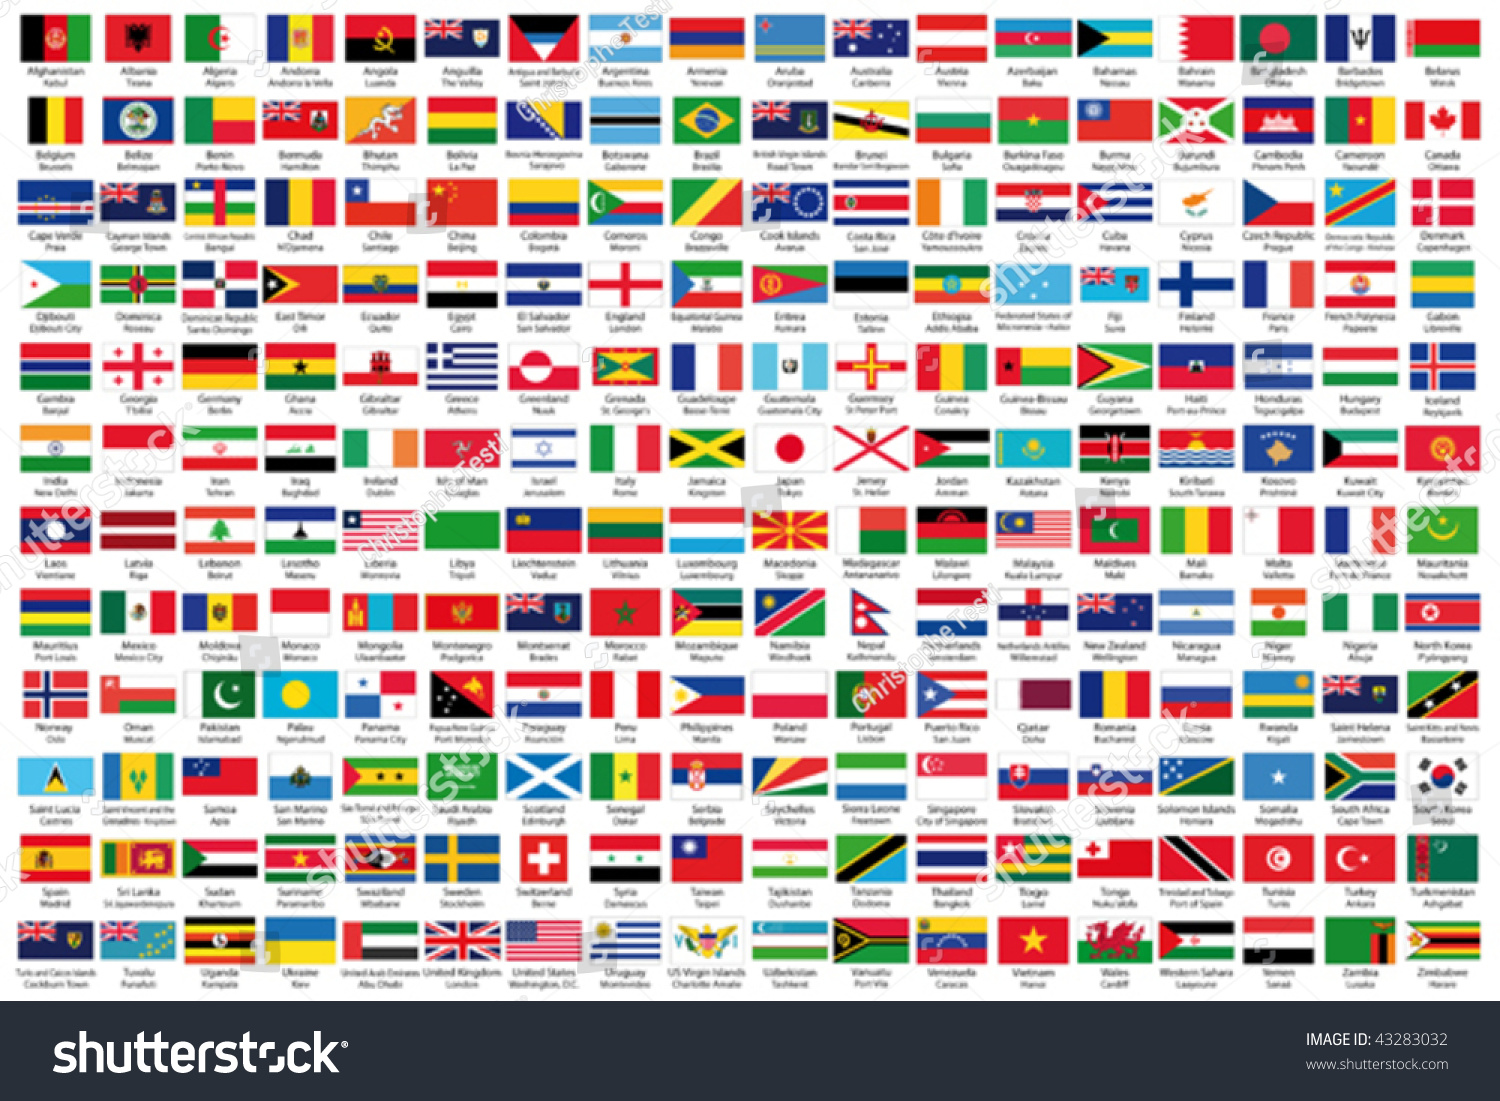 all-countries-in-the-world-in-alphabetical-order-essayhelp954-web-fc2